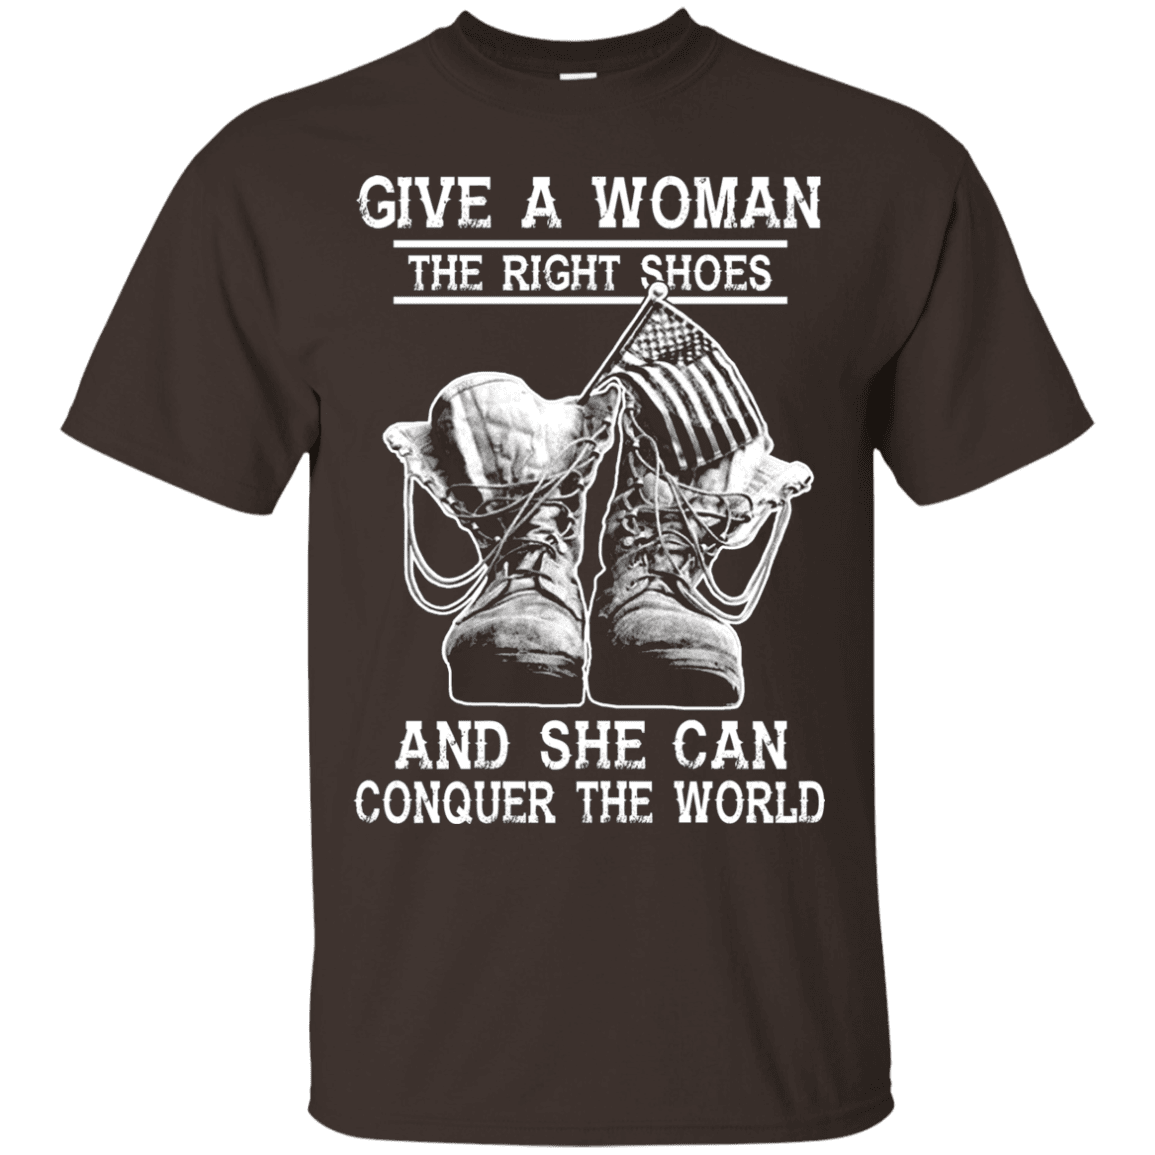 Military T-Shirt "Give a woman the right shoes, and she can conquer the world"-TShirt-General-Veterans Nation